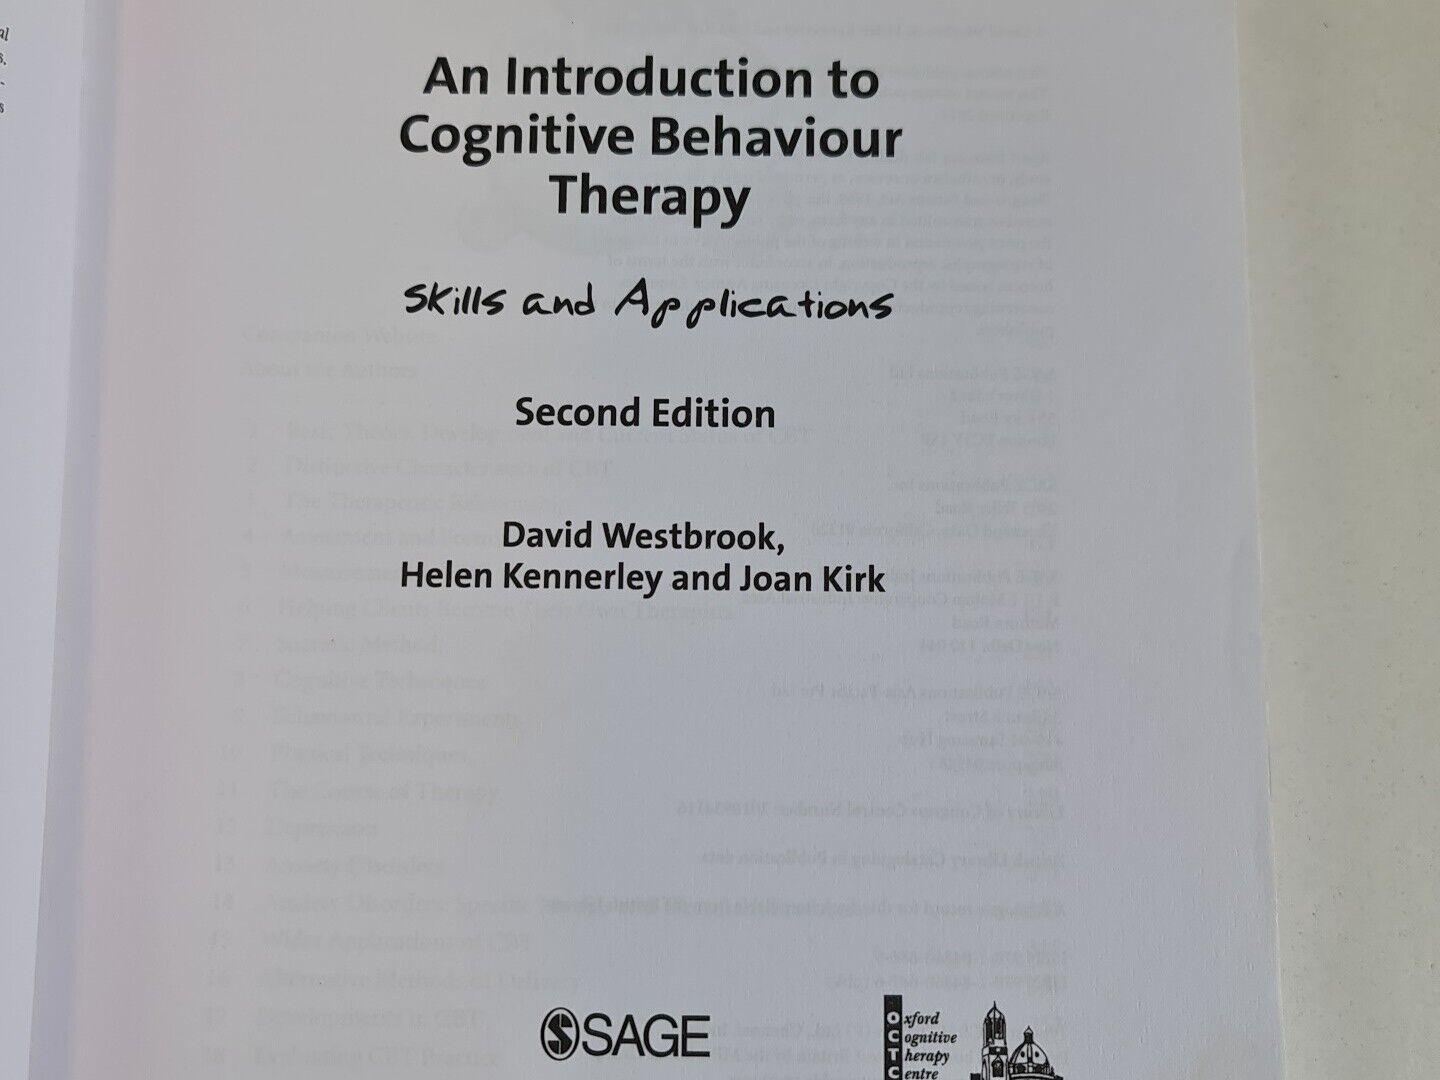 An Introduction to Cognitive Behaviour Therapy... by David Westbrook (2011)